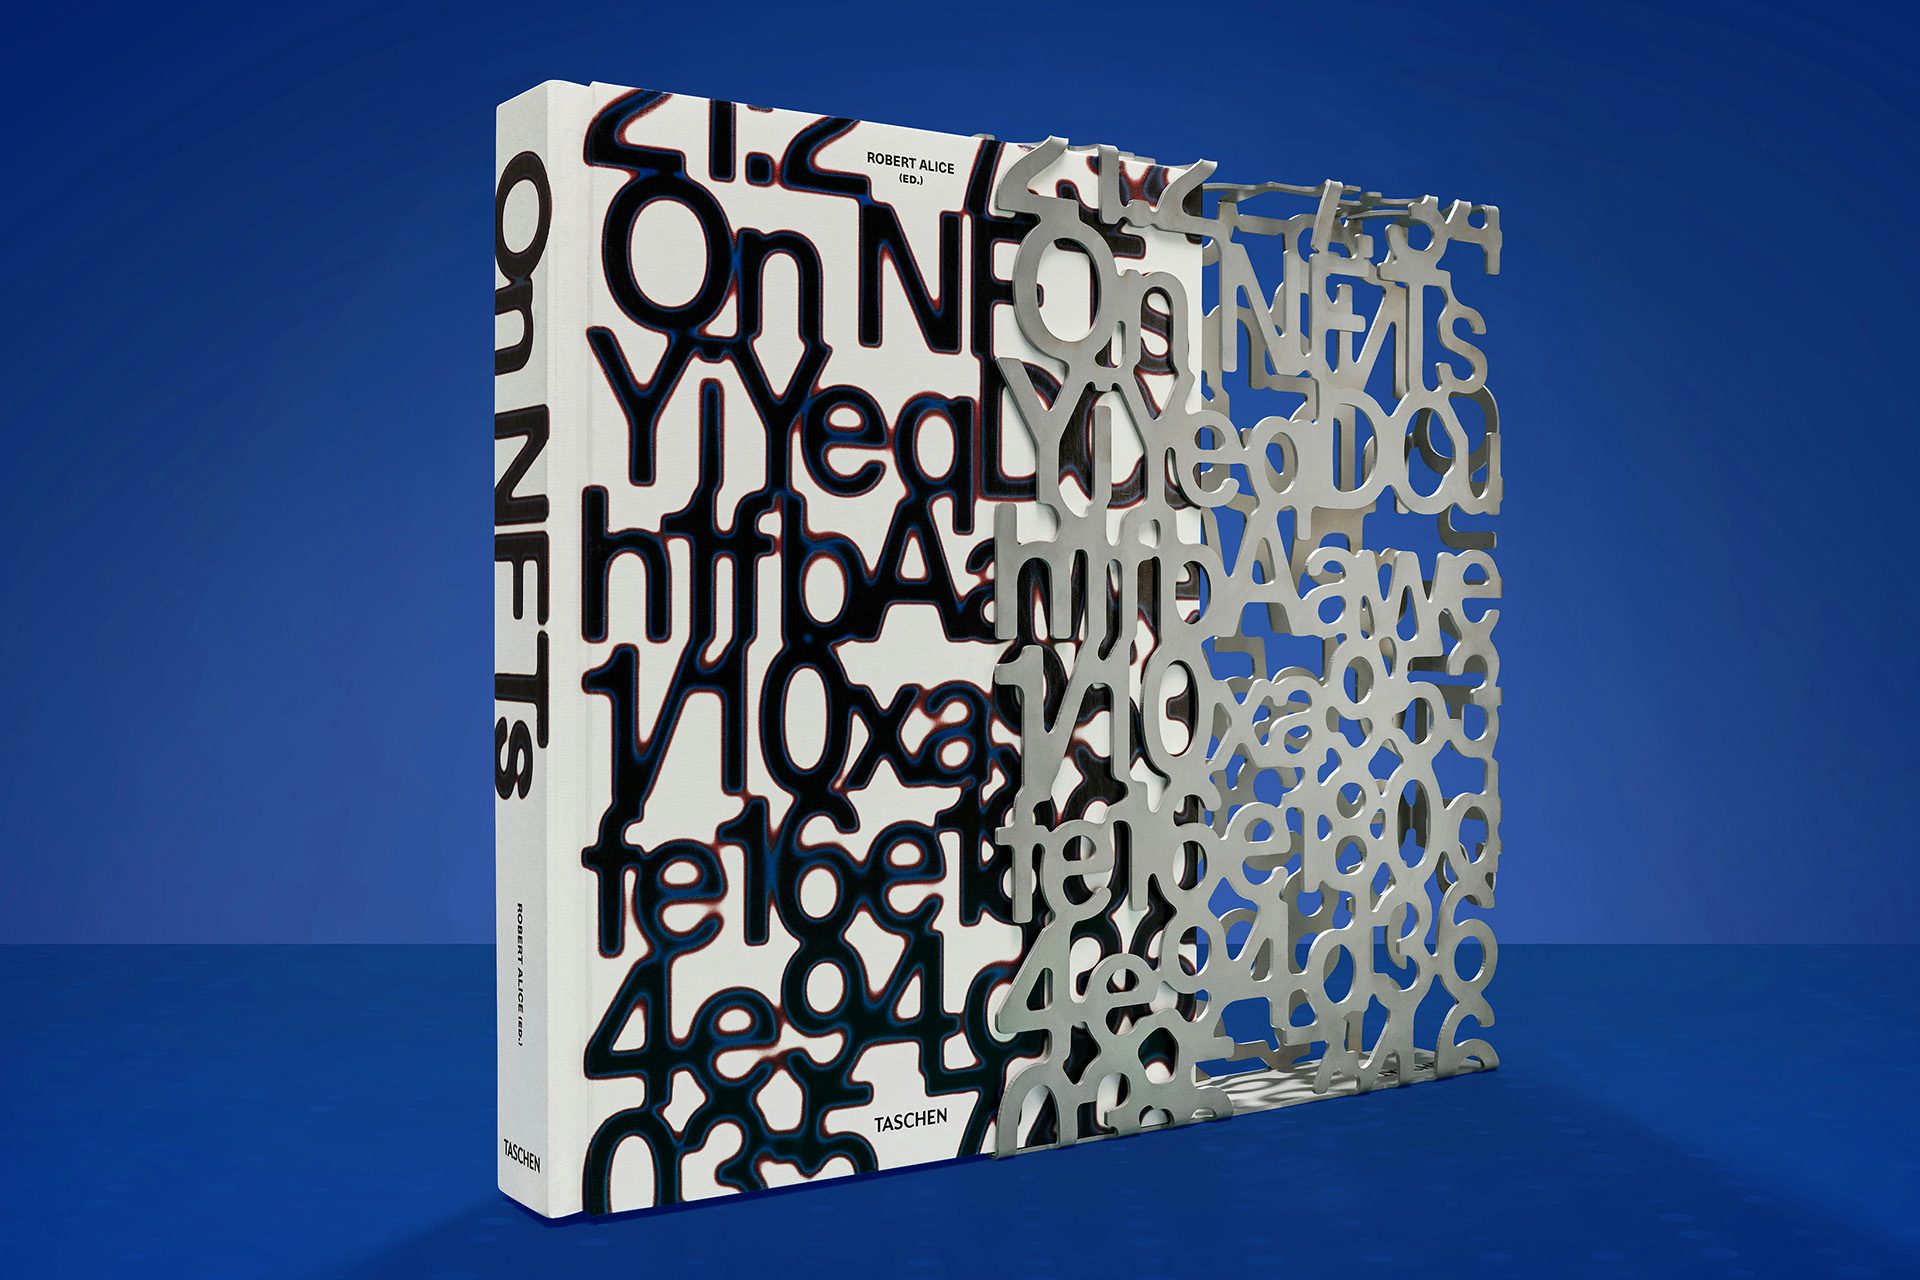 Image shows the letter-based design on the cover of On NFTs by Robert Alice, which is shown jutting out from the semi-transparent hard slip-case design